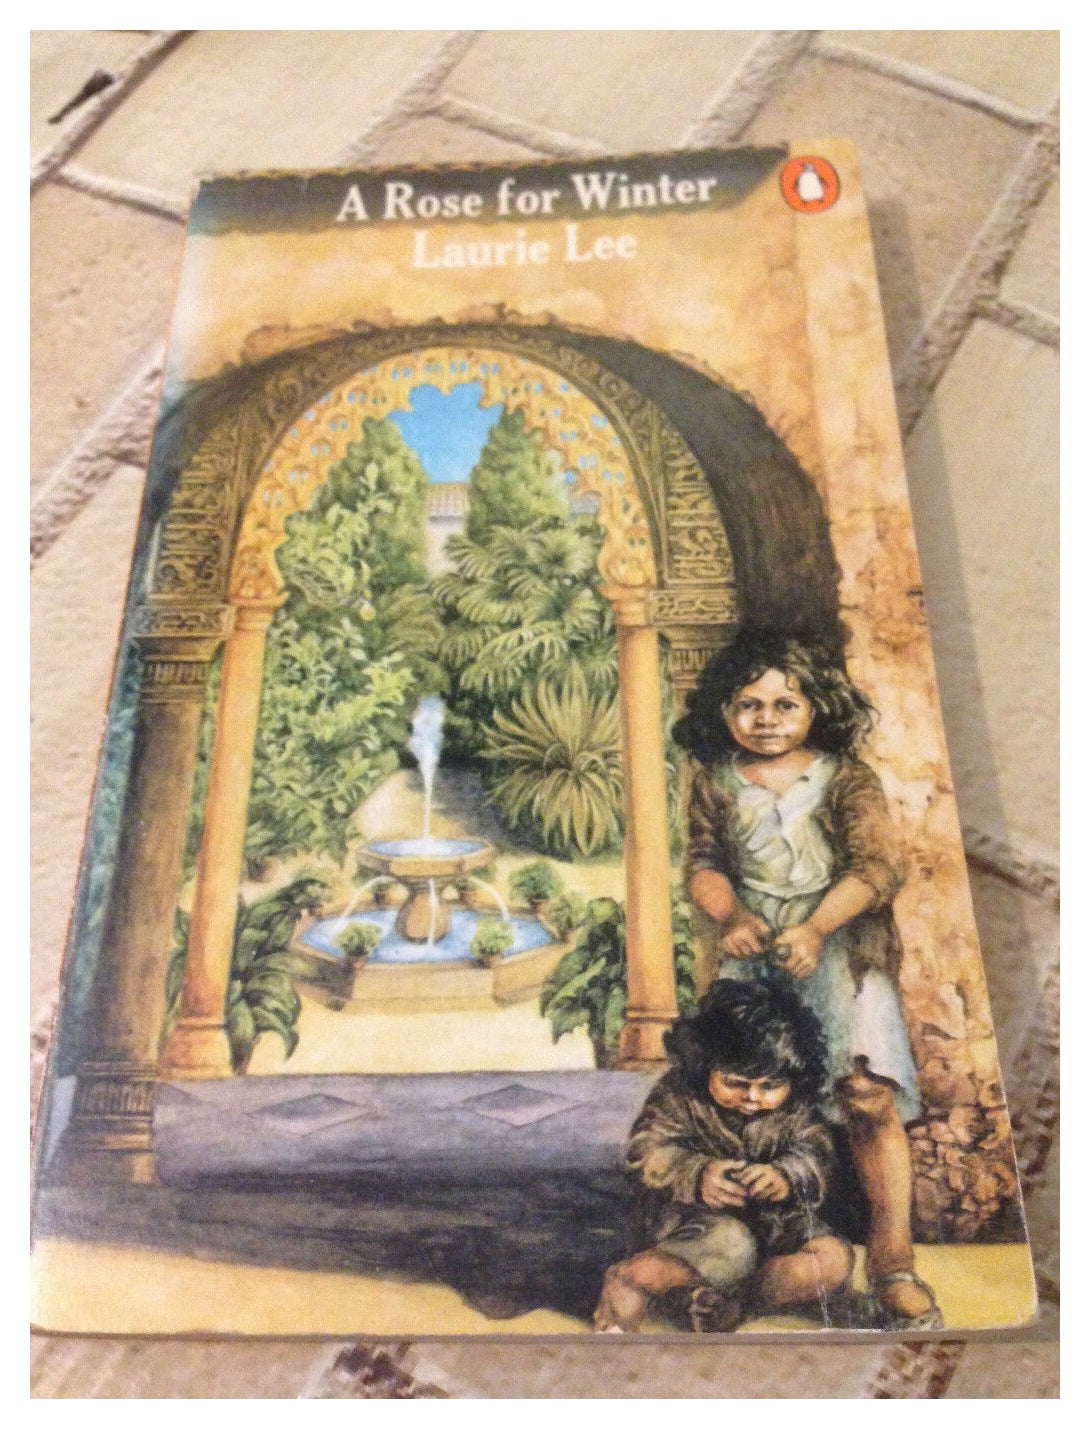 A Rose For Winter By Laurie Lee (Penguin Paperback Book 1963)